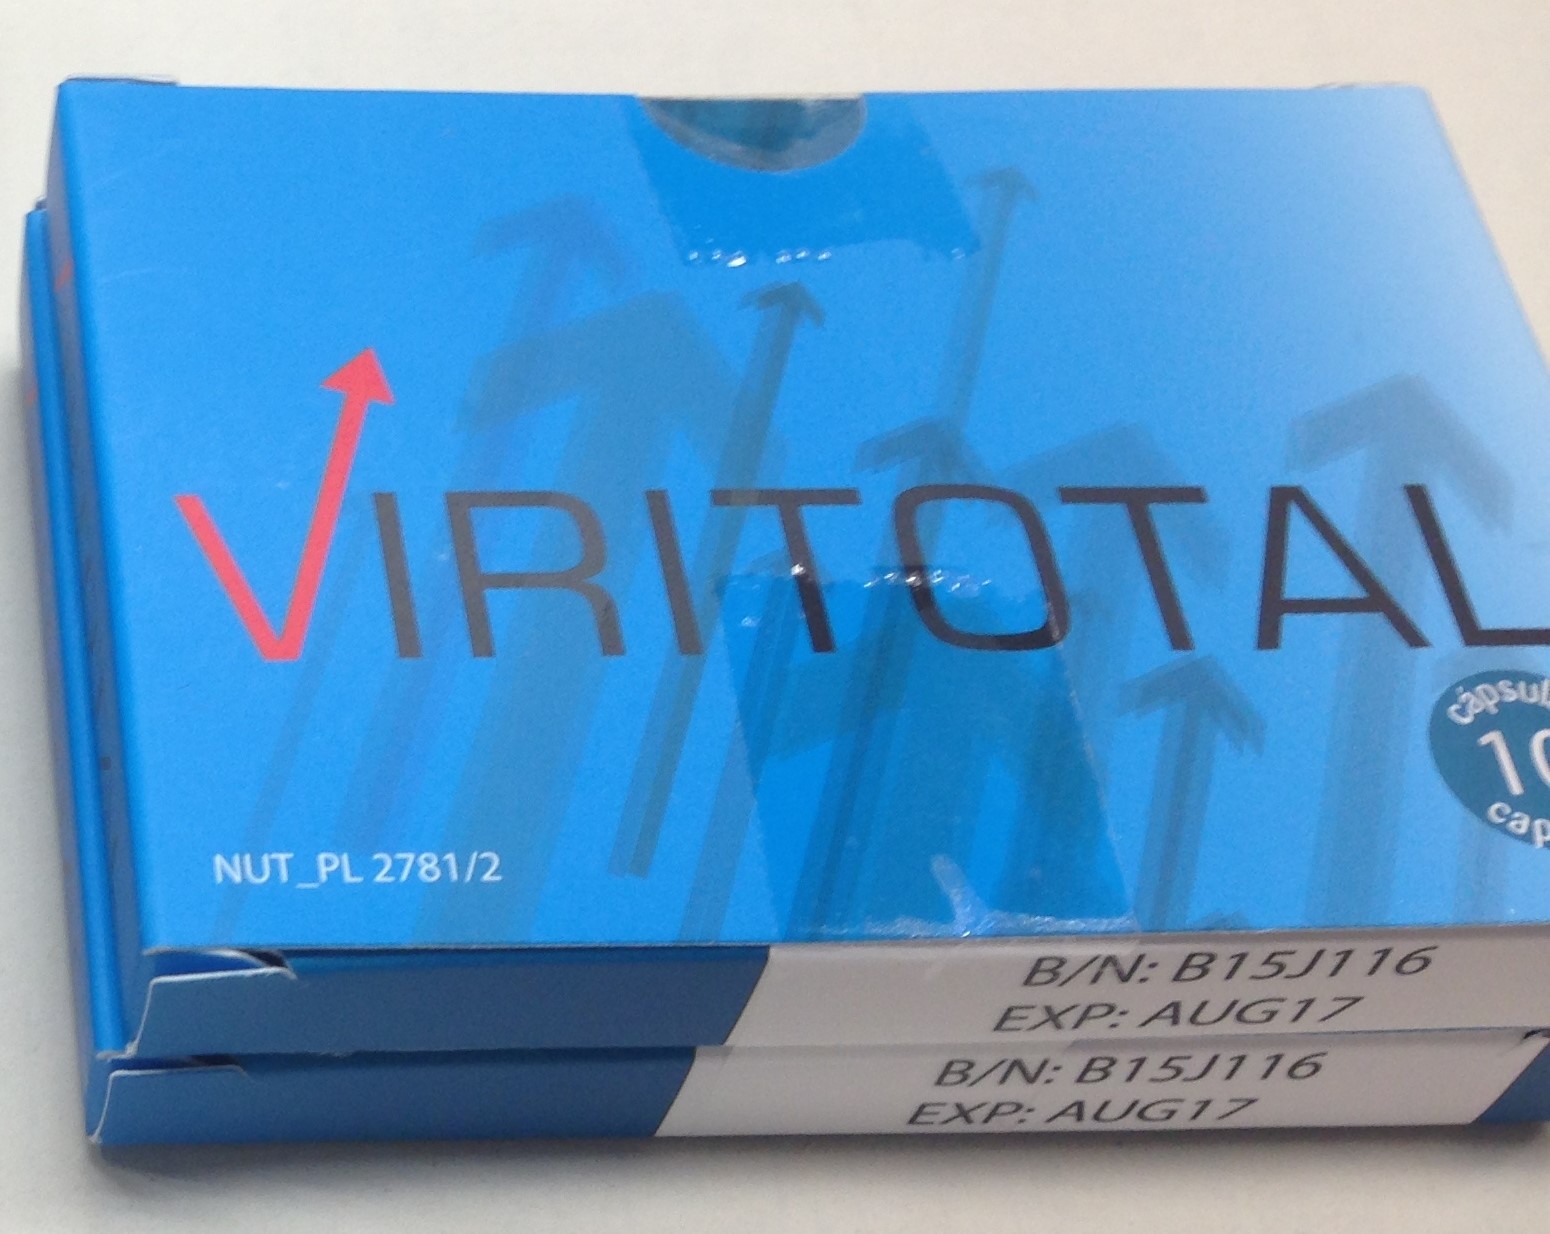 Image of the illigal product: Viritotal